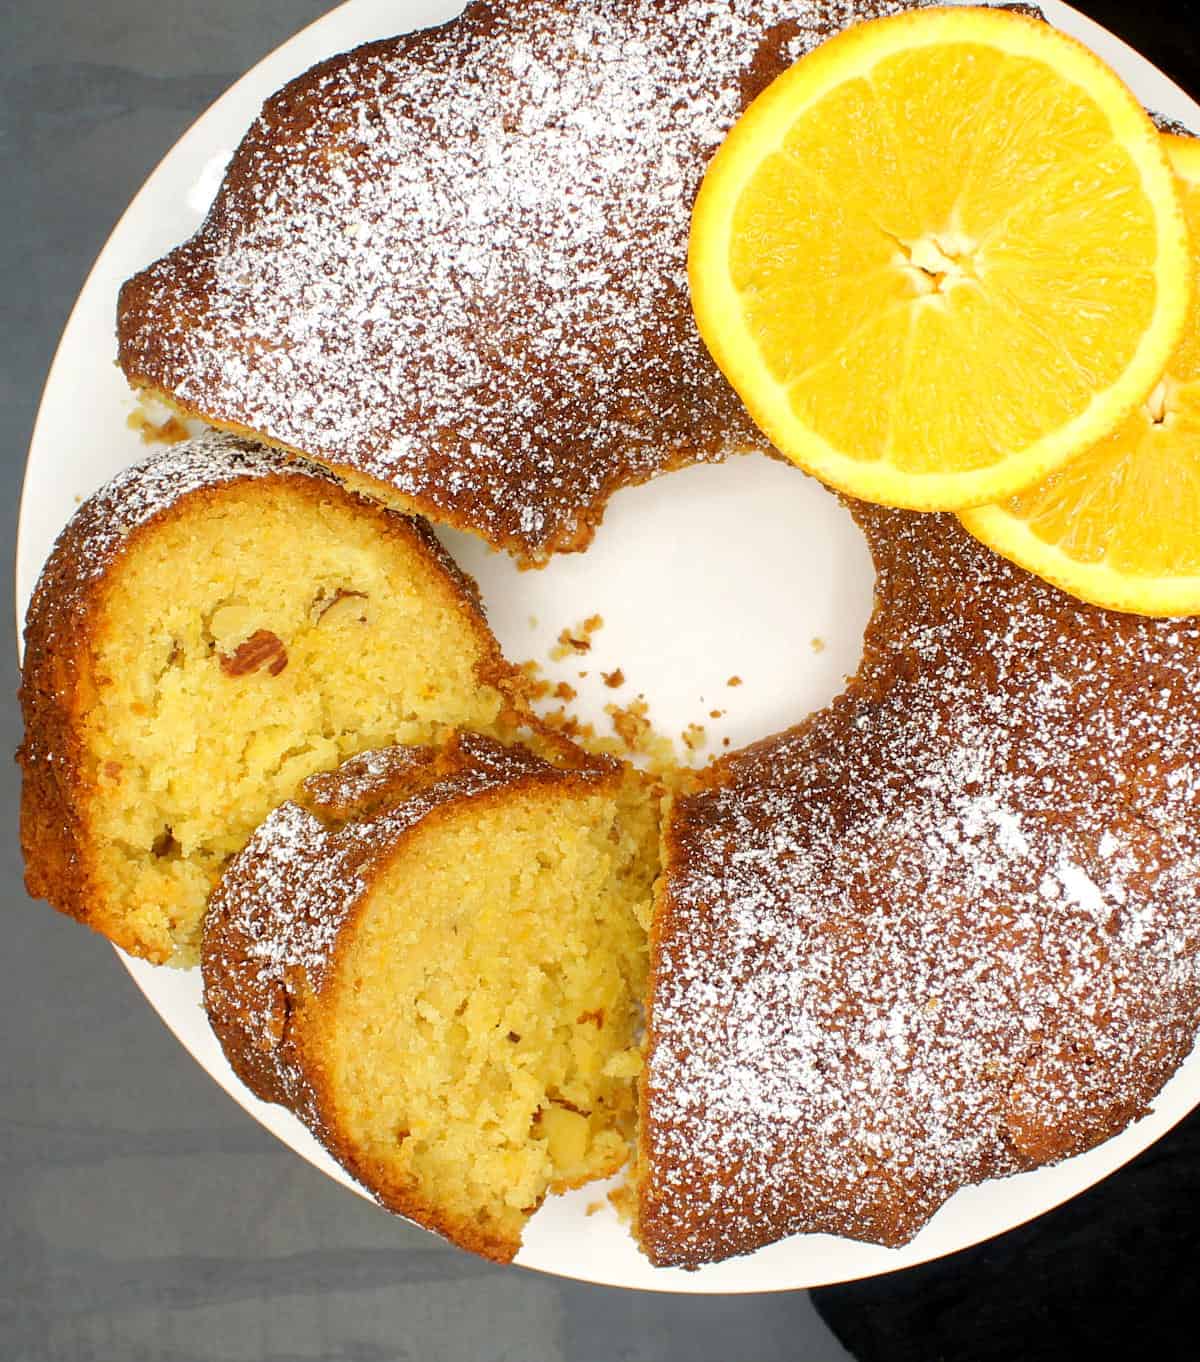 Overhead shot of a sliced Greek new year's cake with orange slices and a dusting of powdered sugar.